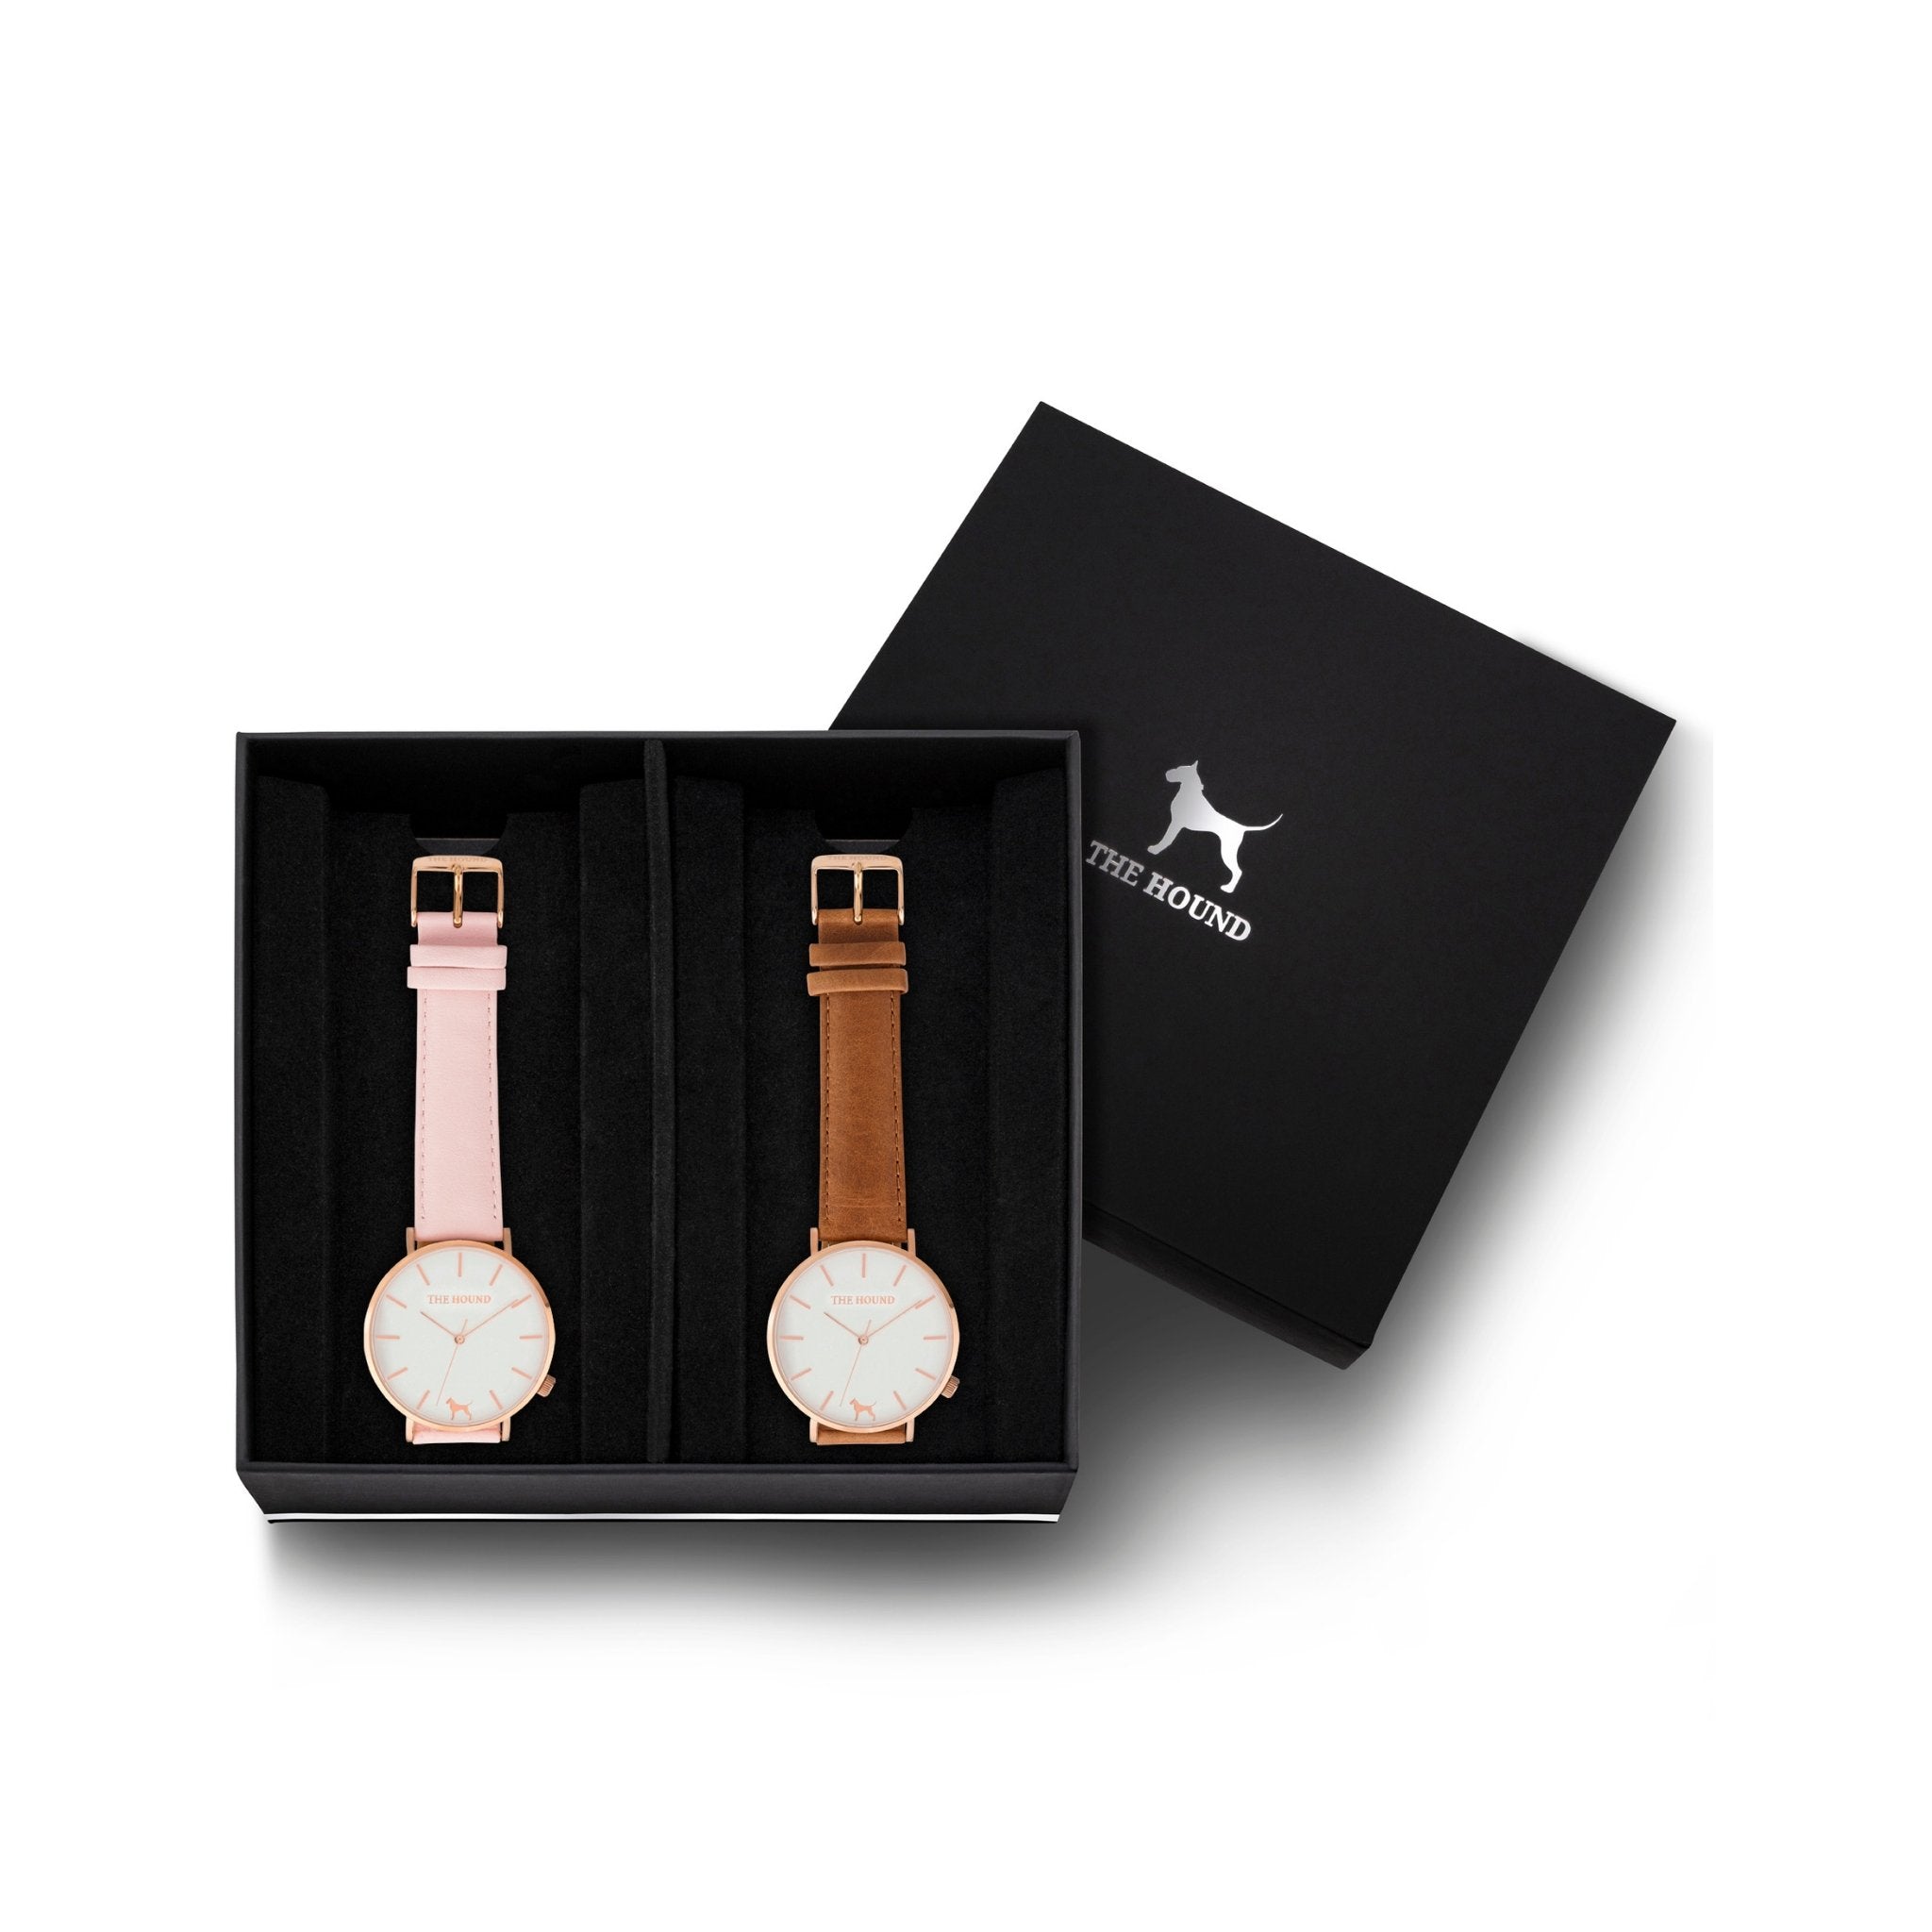 Custom gift set - Rose gold and white watch with stitched blush pink genuine leather band and a rose gold and white watch with stitched tan genuine leather band